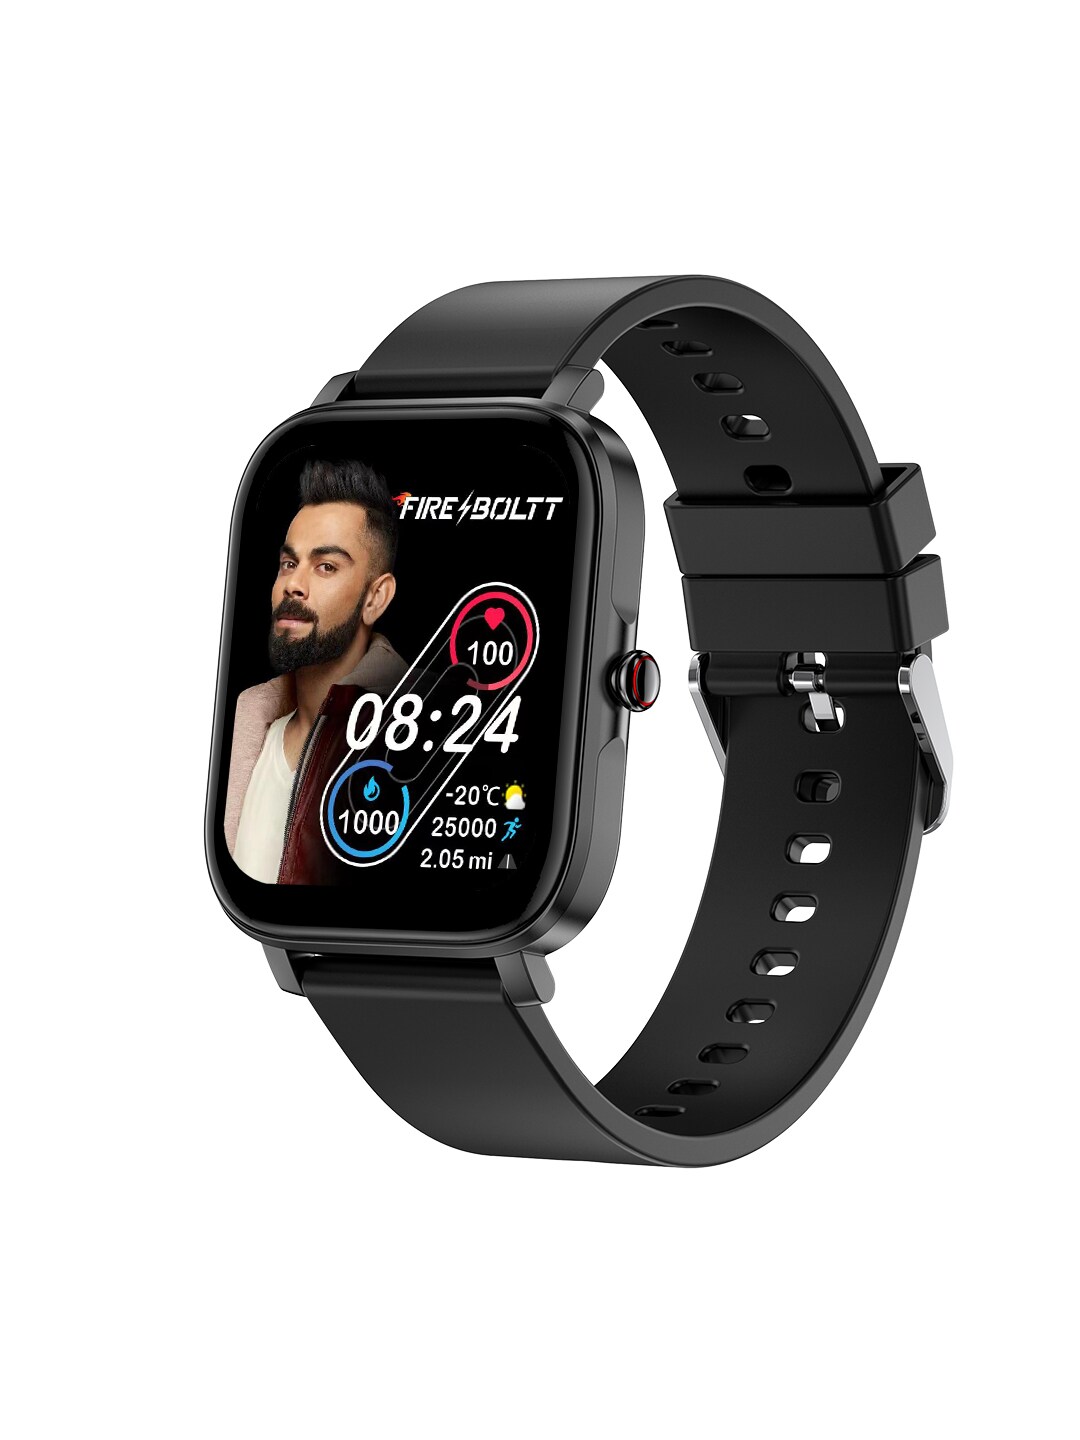 Fire-Boltt Unisex Black Ninja 2 Plus 1.69 Ultra-Thin 9.5mm Smartwatch 31BSWAAY#1 Price in India